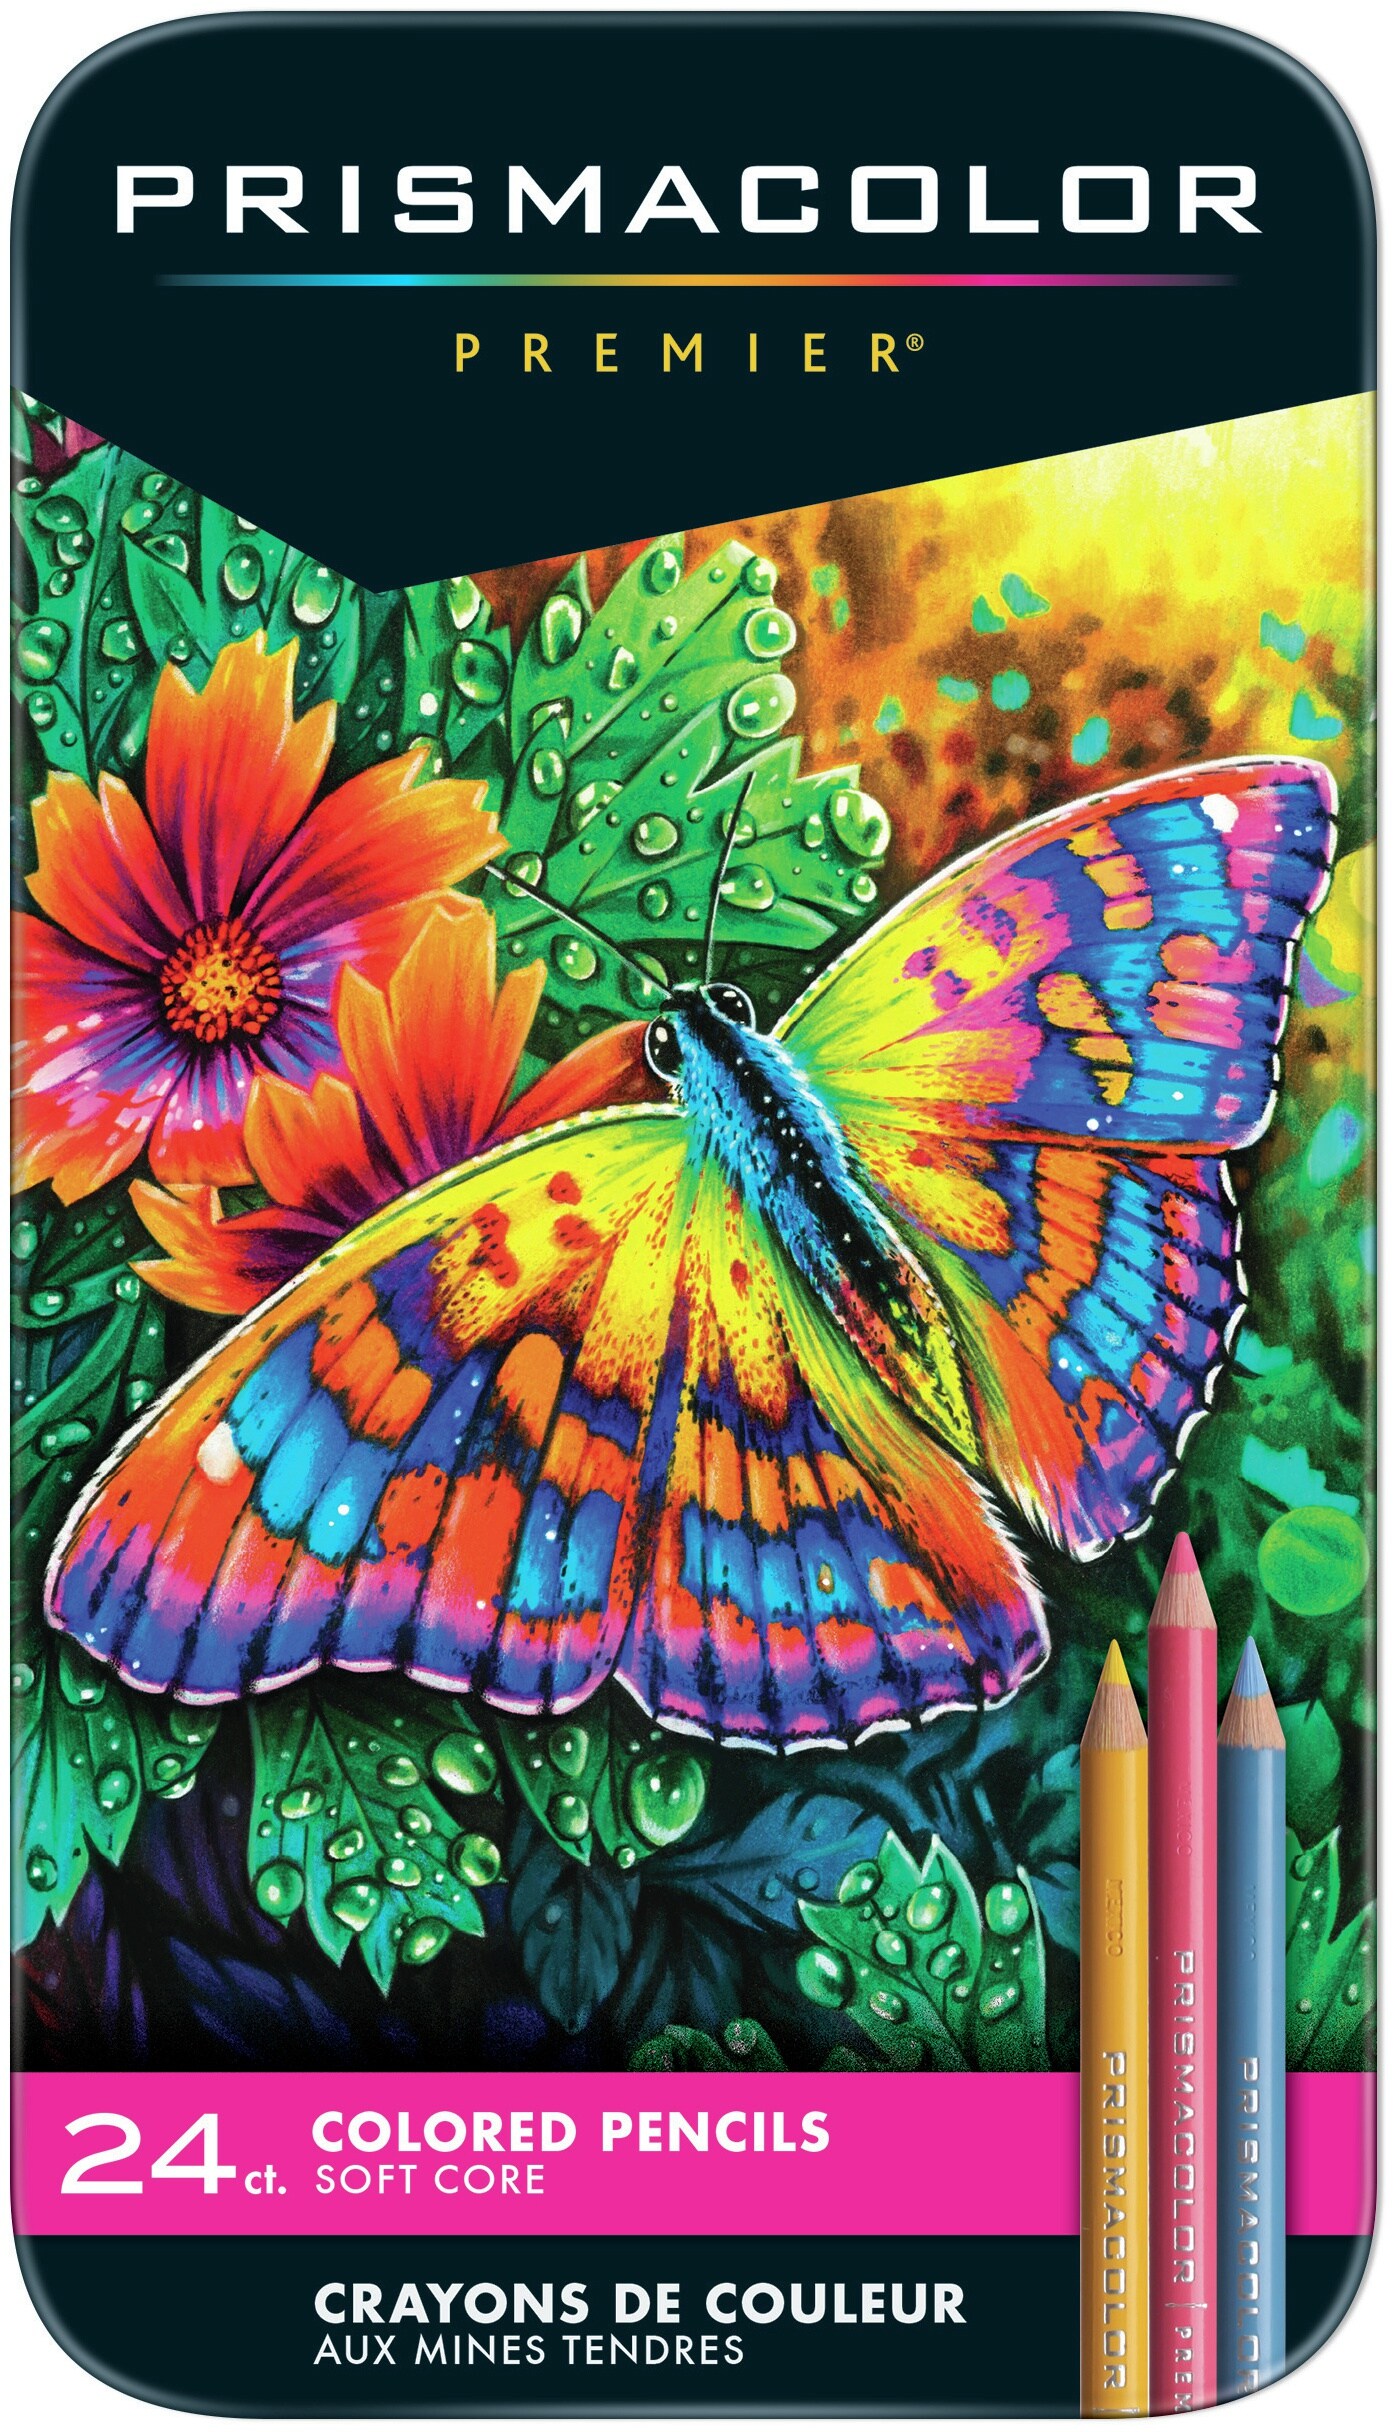 Butterflies Adult Coloring Book Set With 24 Colored Pencils And